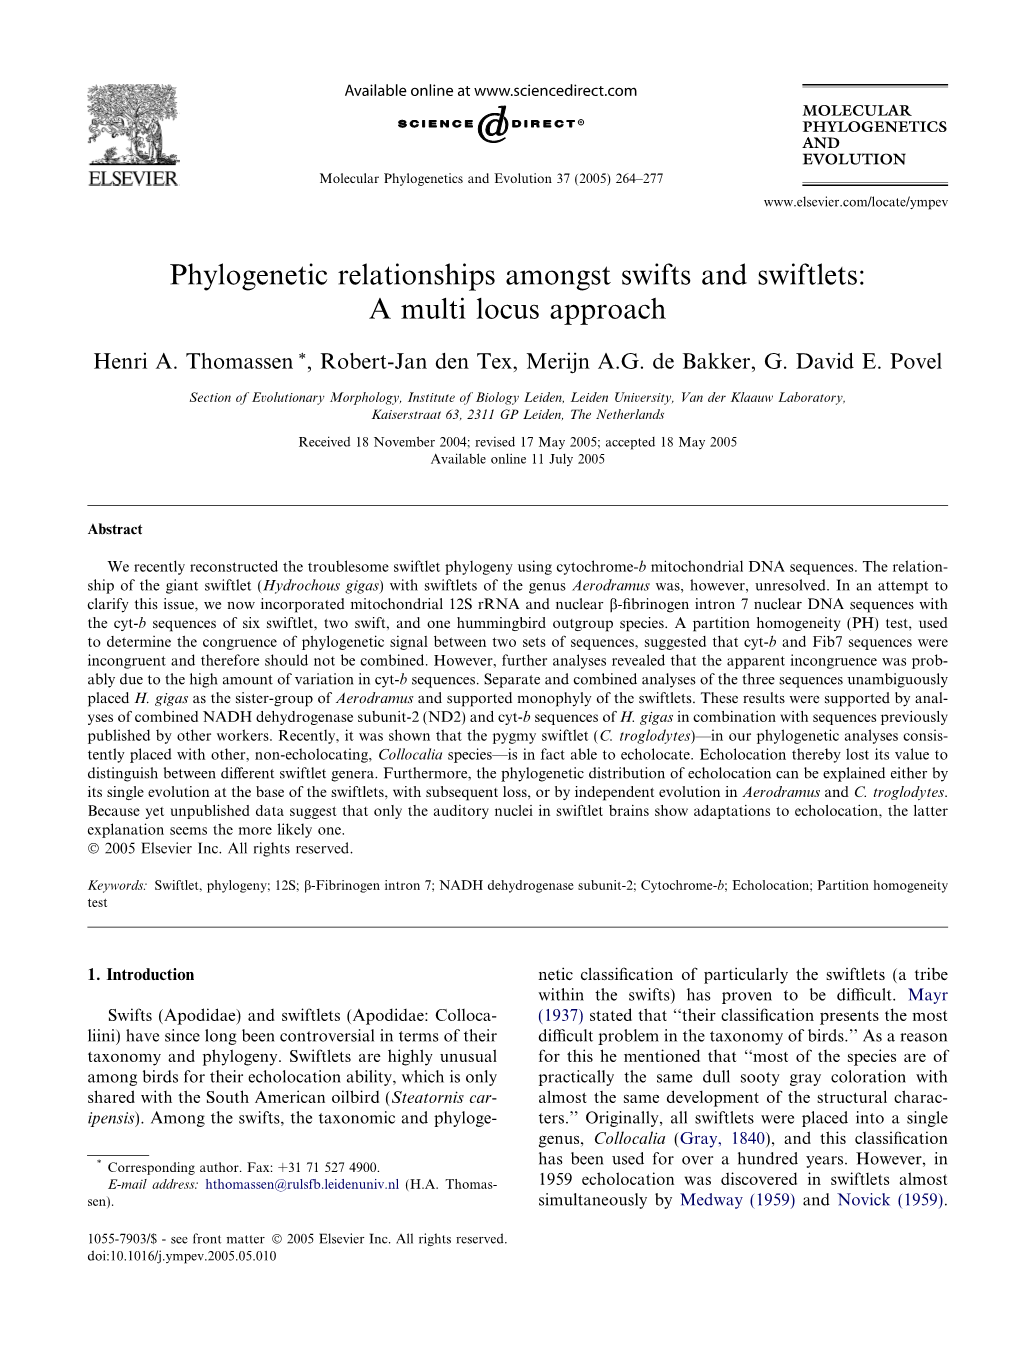 Phylogenetic Relationships Amongst Swifts and Swiftlets: a Multi Locus Approach